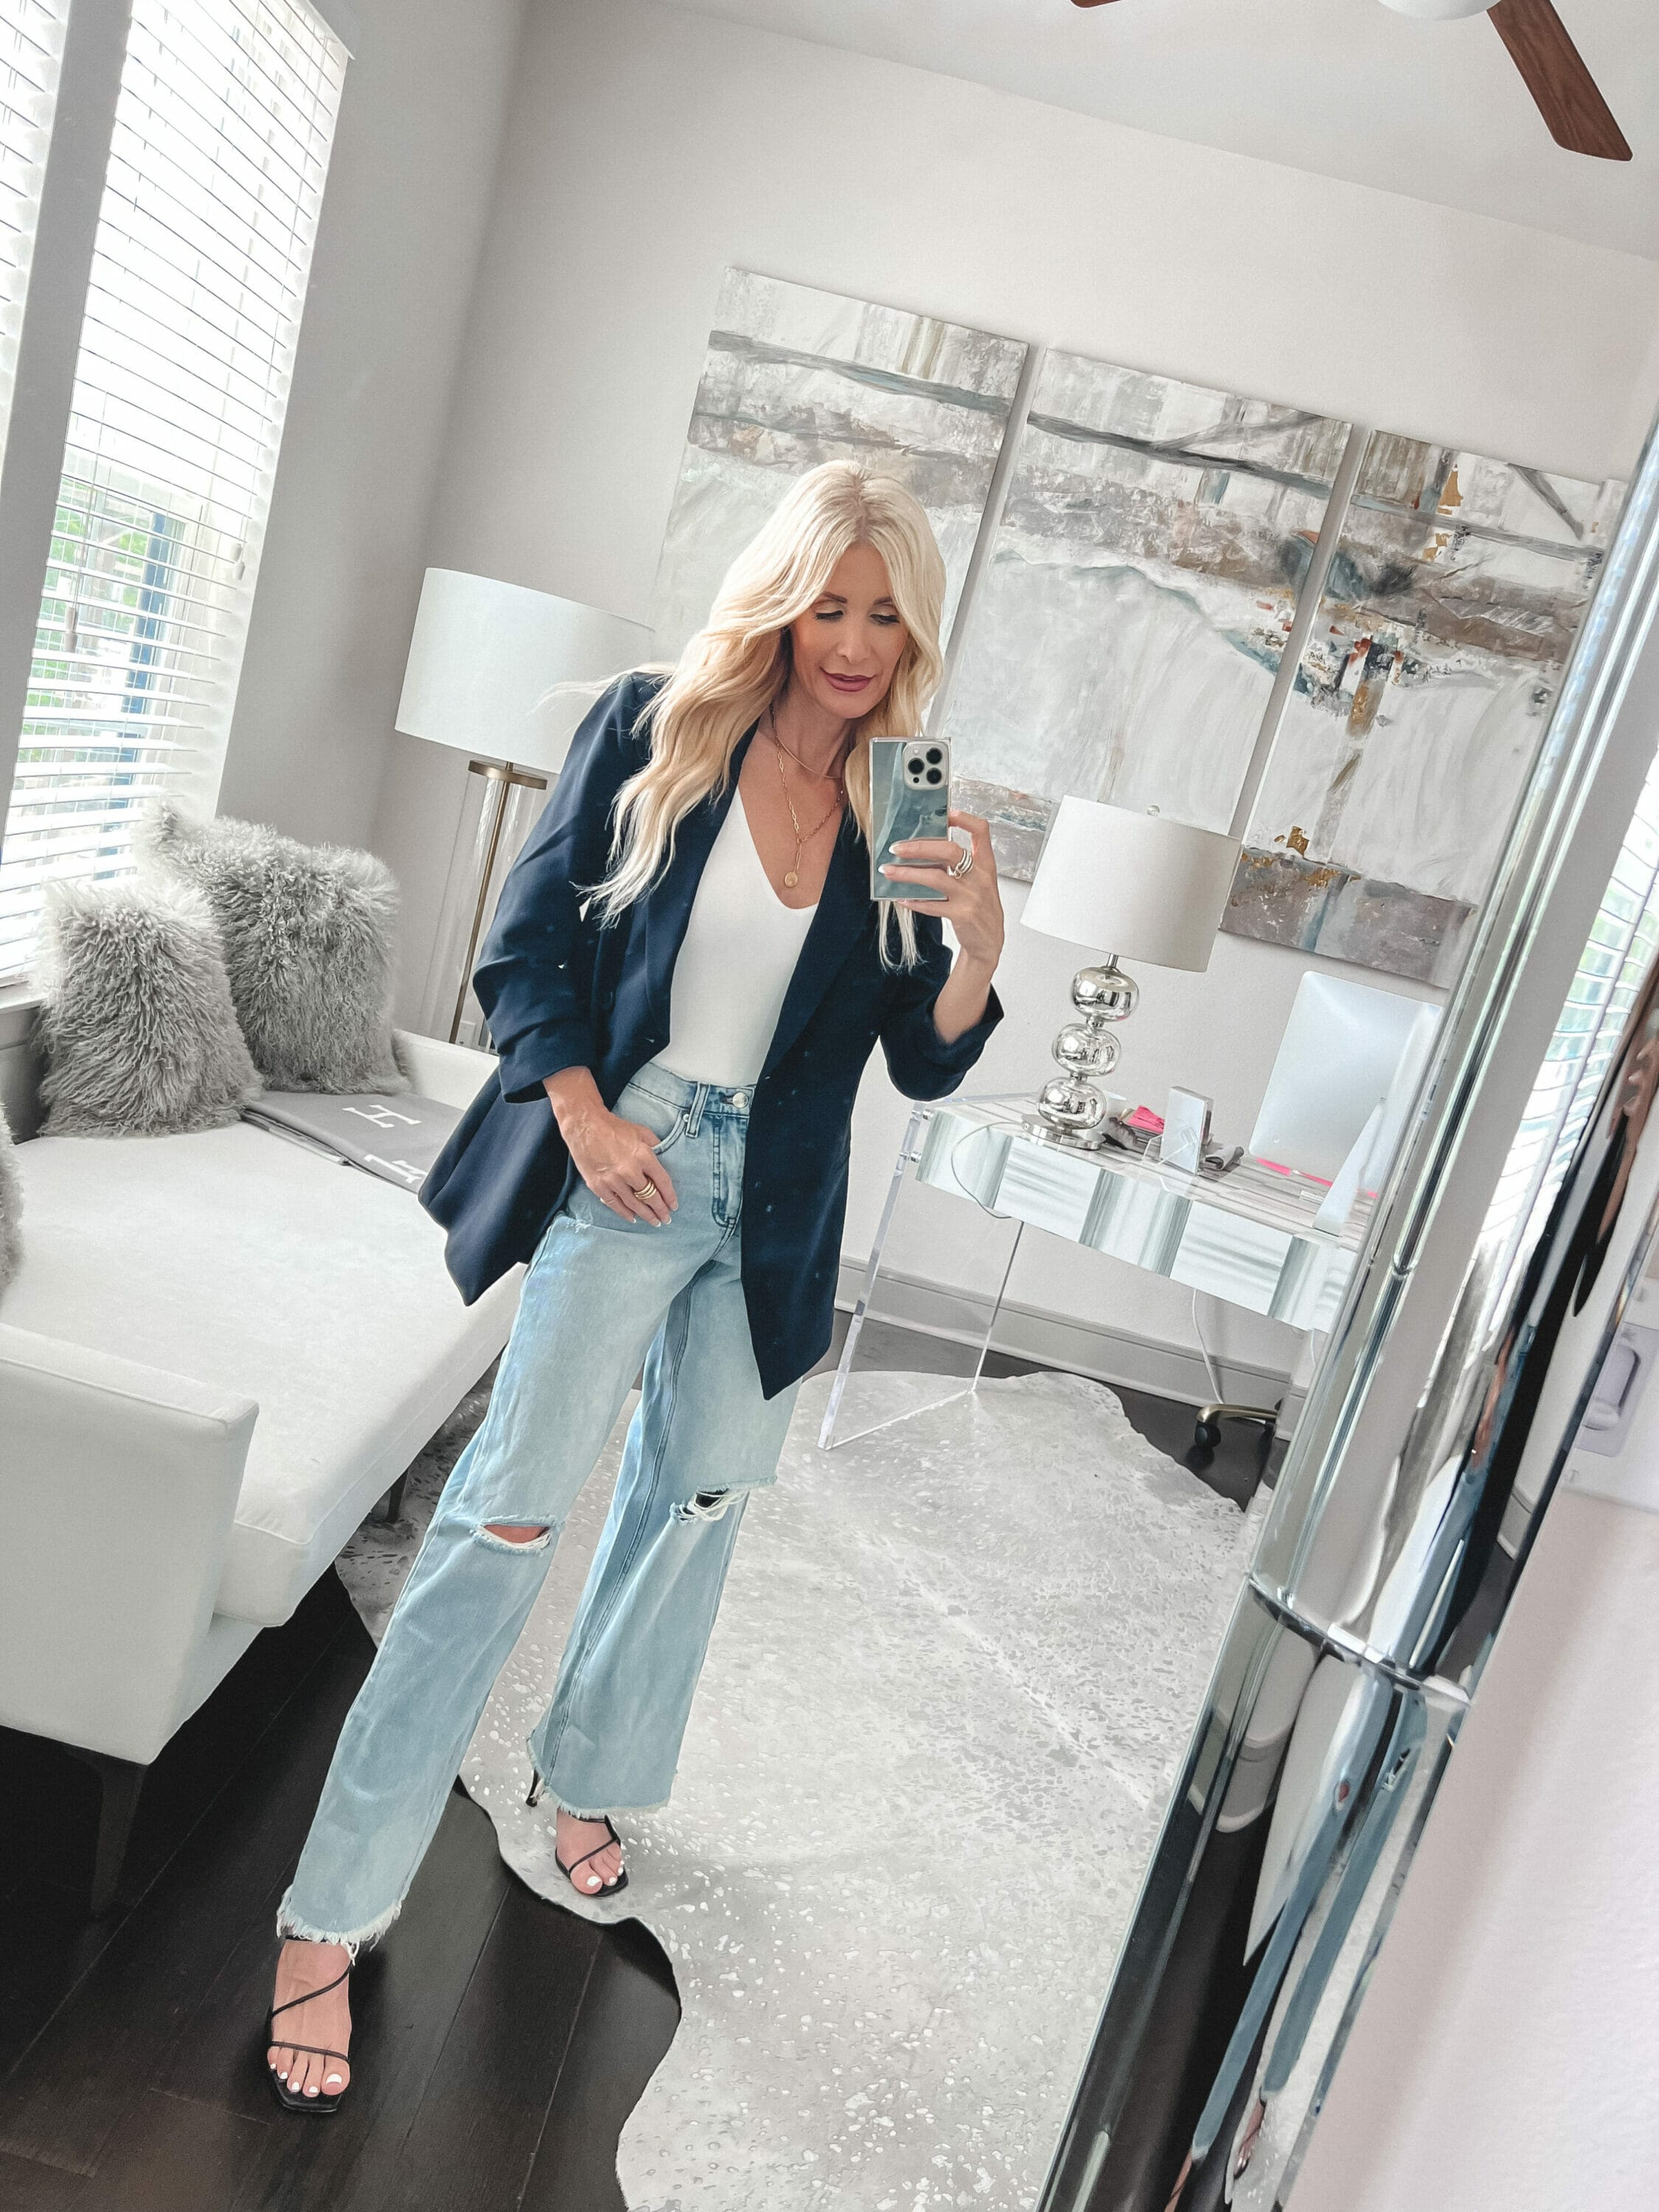 Dallas fashion stylist over 40 wearing a black blazer with a white bodysuit and wide leg jeans, all as surprising summer favorites from Walmart.